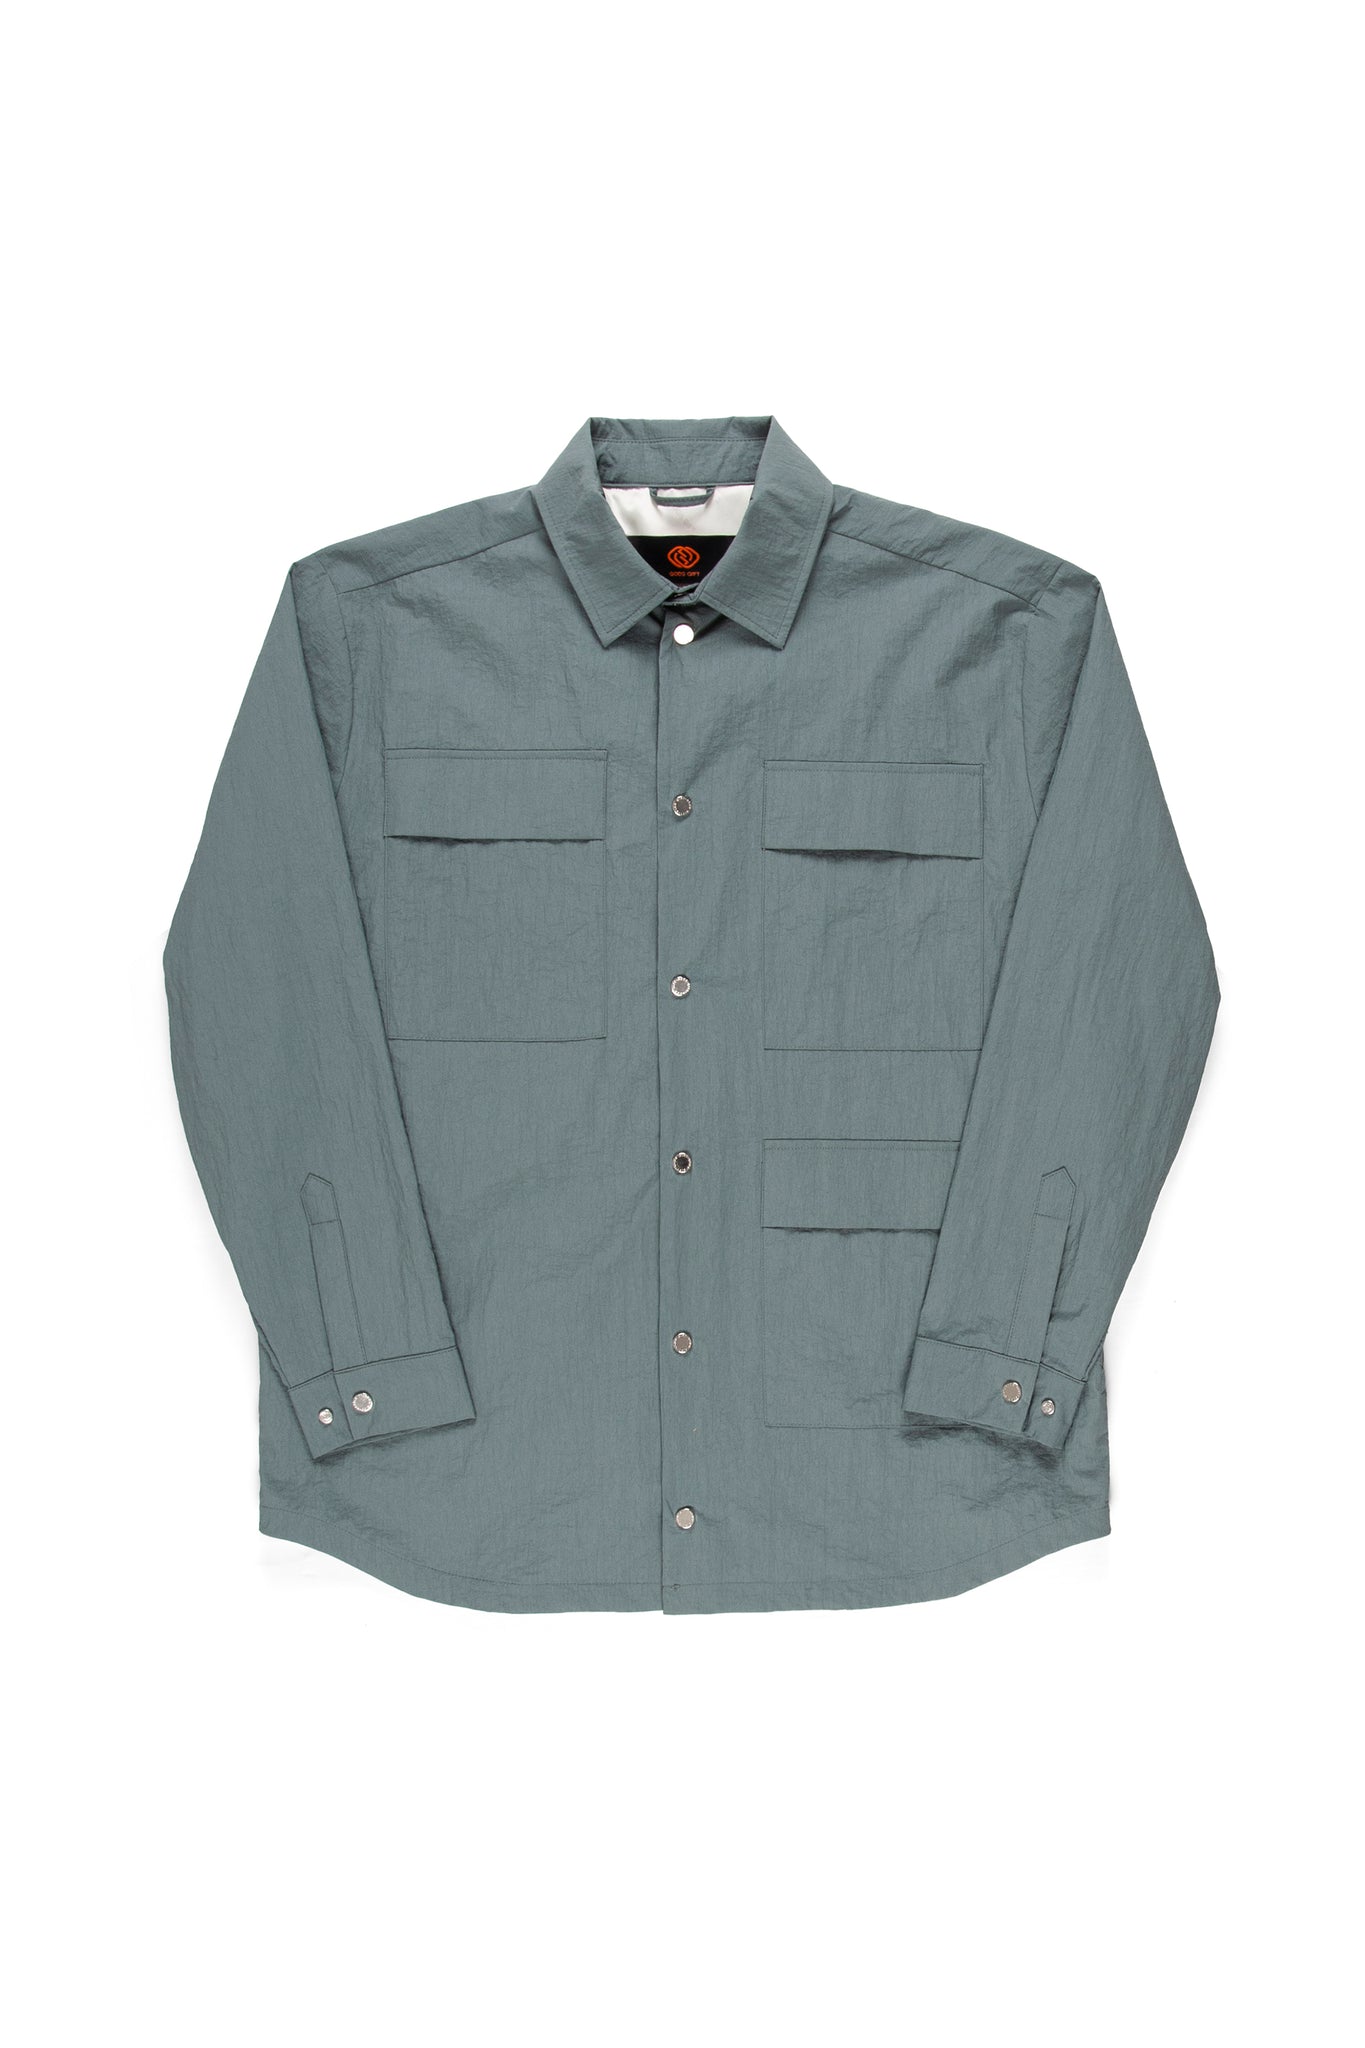 Arezzo Woven Pocket Shirt in Green